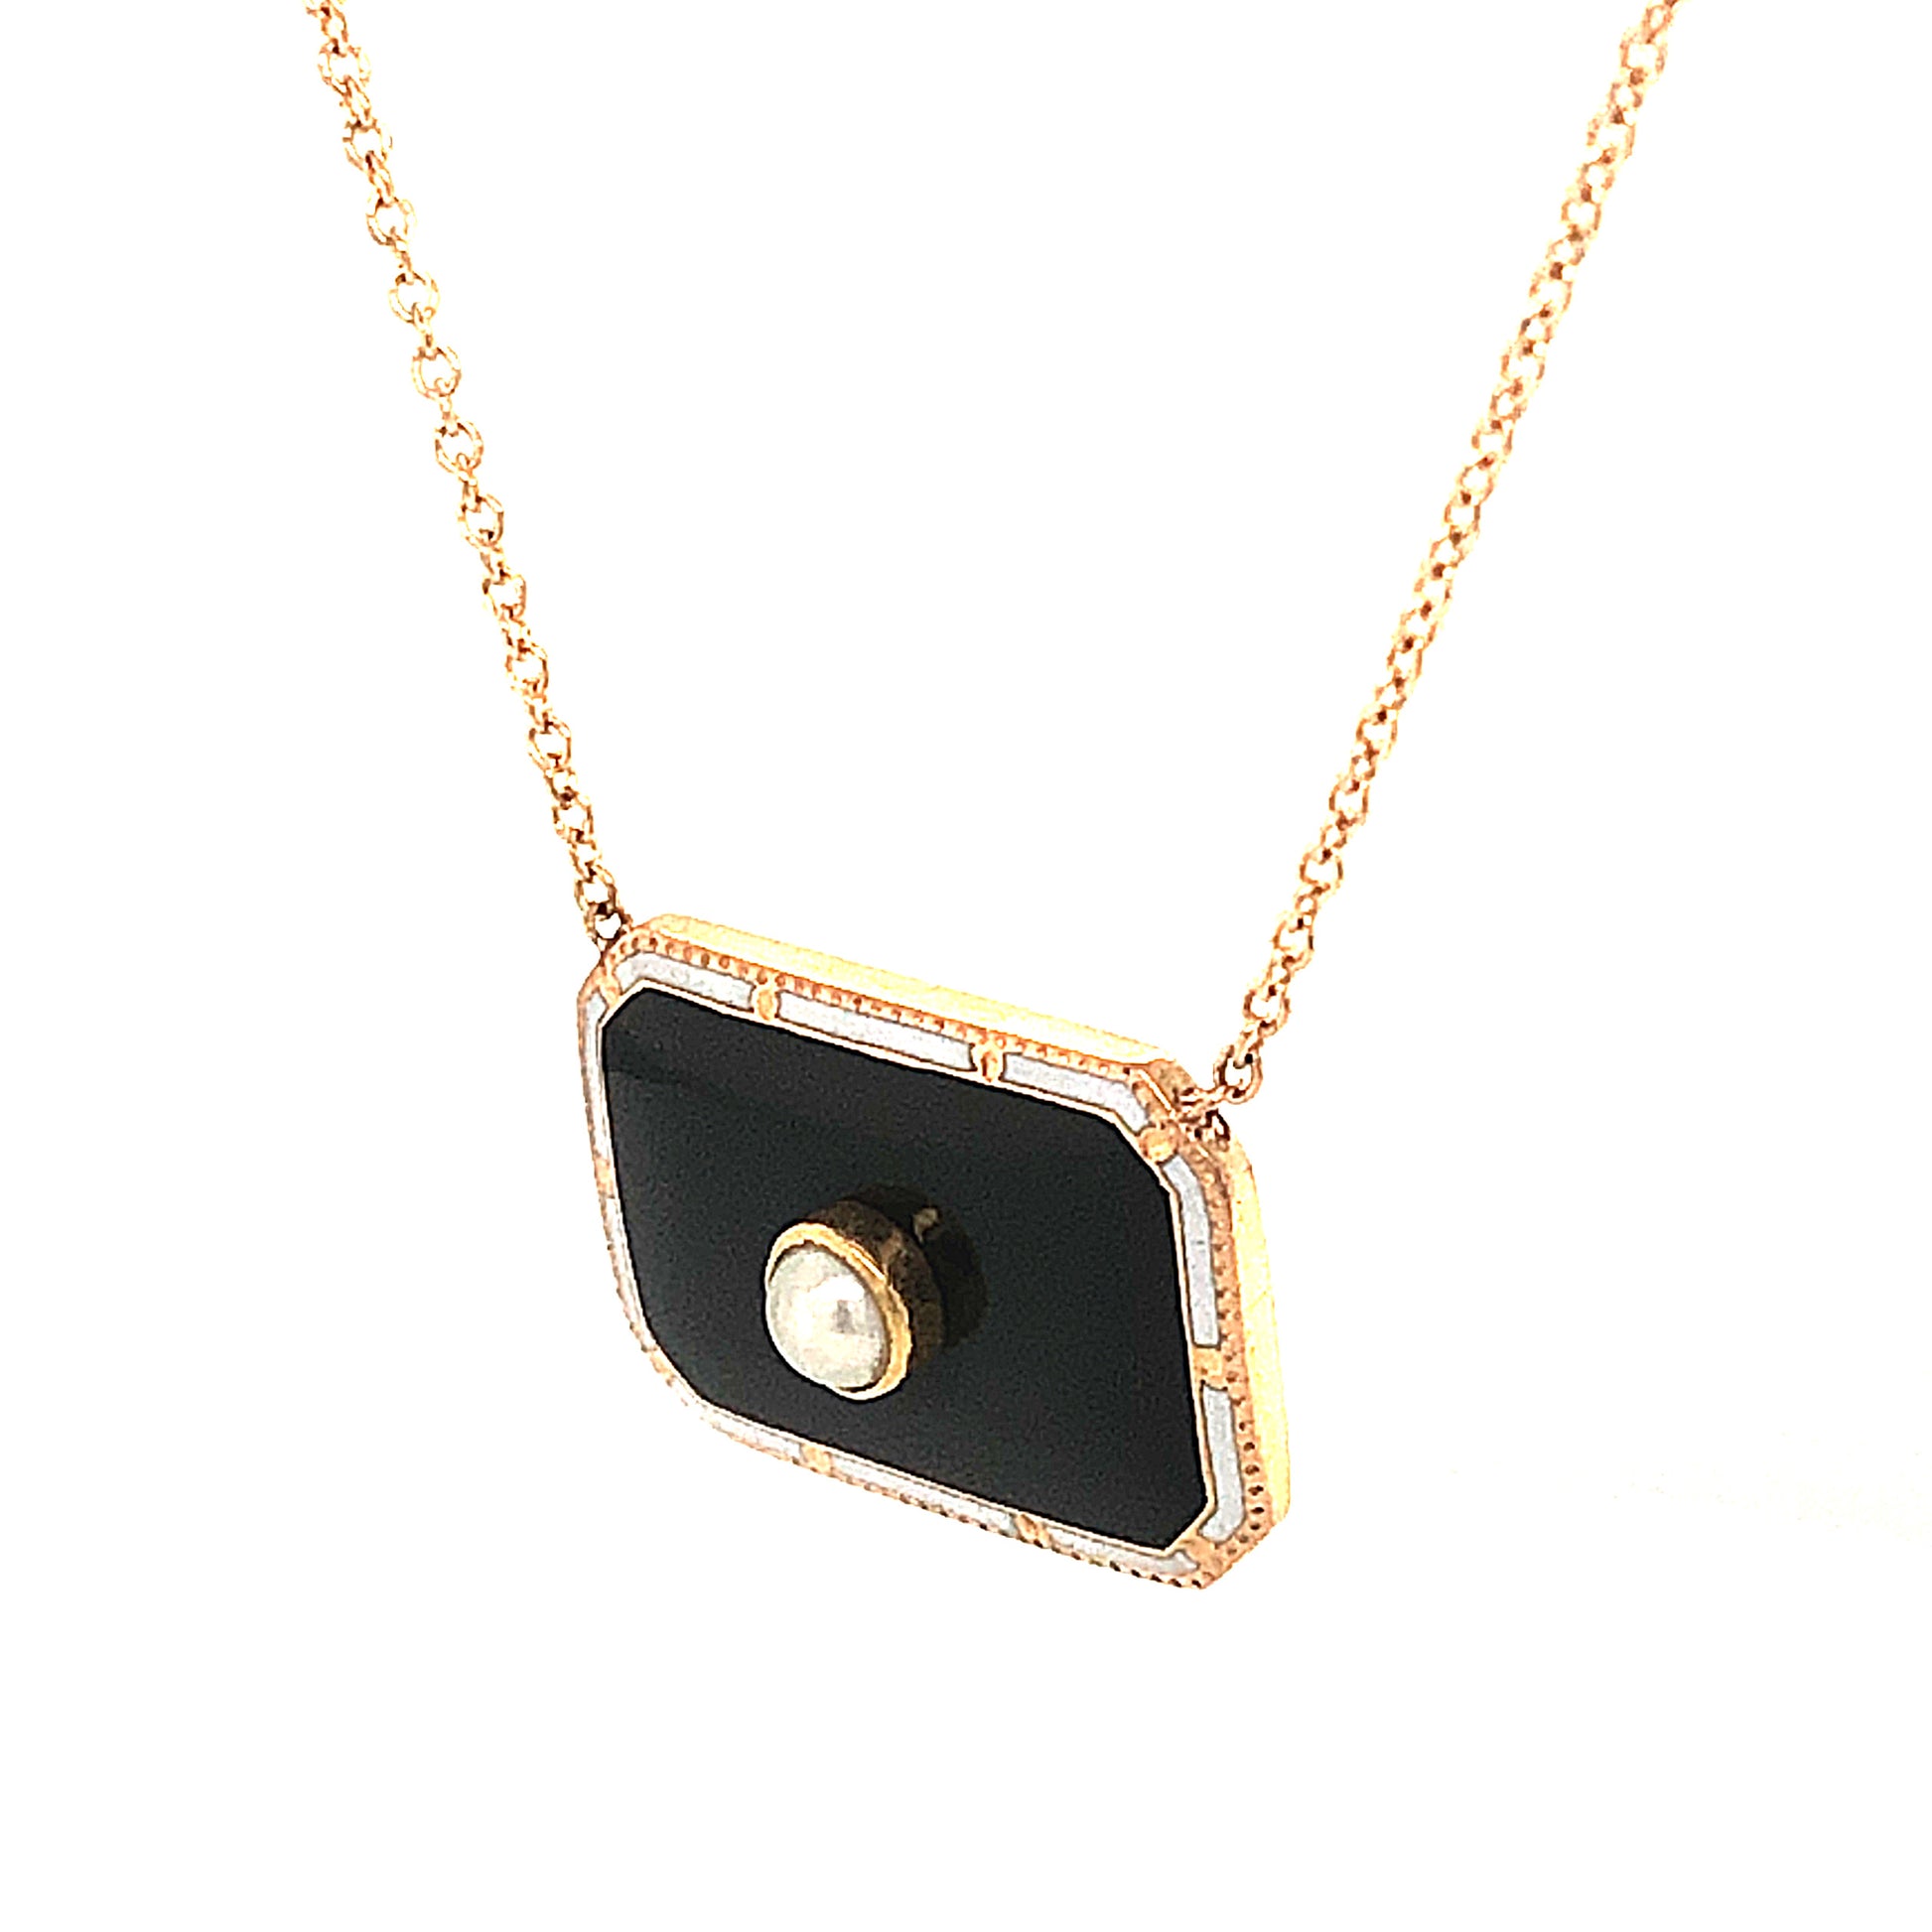 Enamel & Pearl Pendant Necklace in 14k Yellow GoldComposition: Platinum Total Gram Weight: 3.7 g Inscription: In Memory of F.M. , March 13th 1922 , 14k , MS CO
      